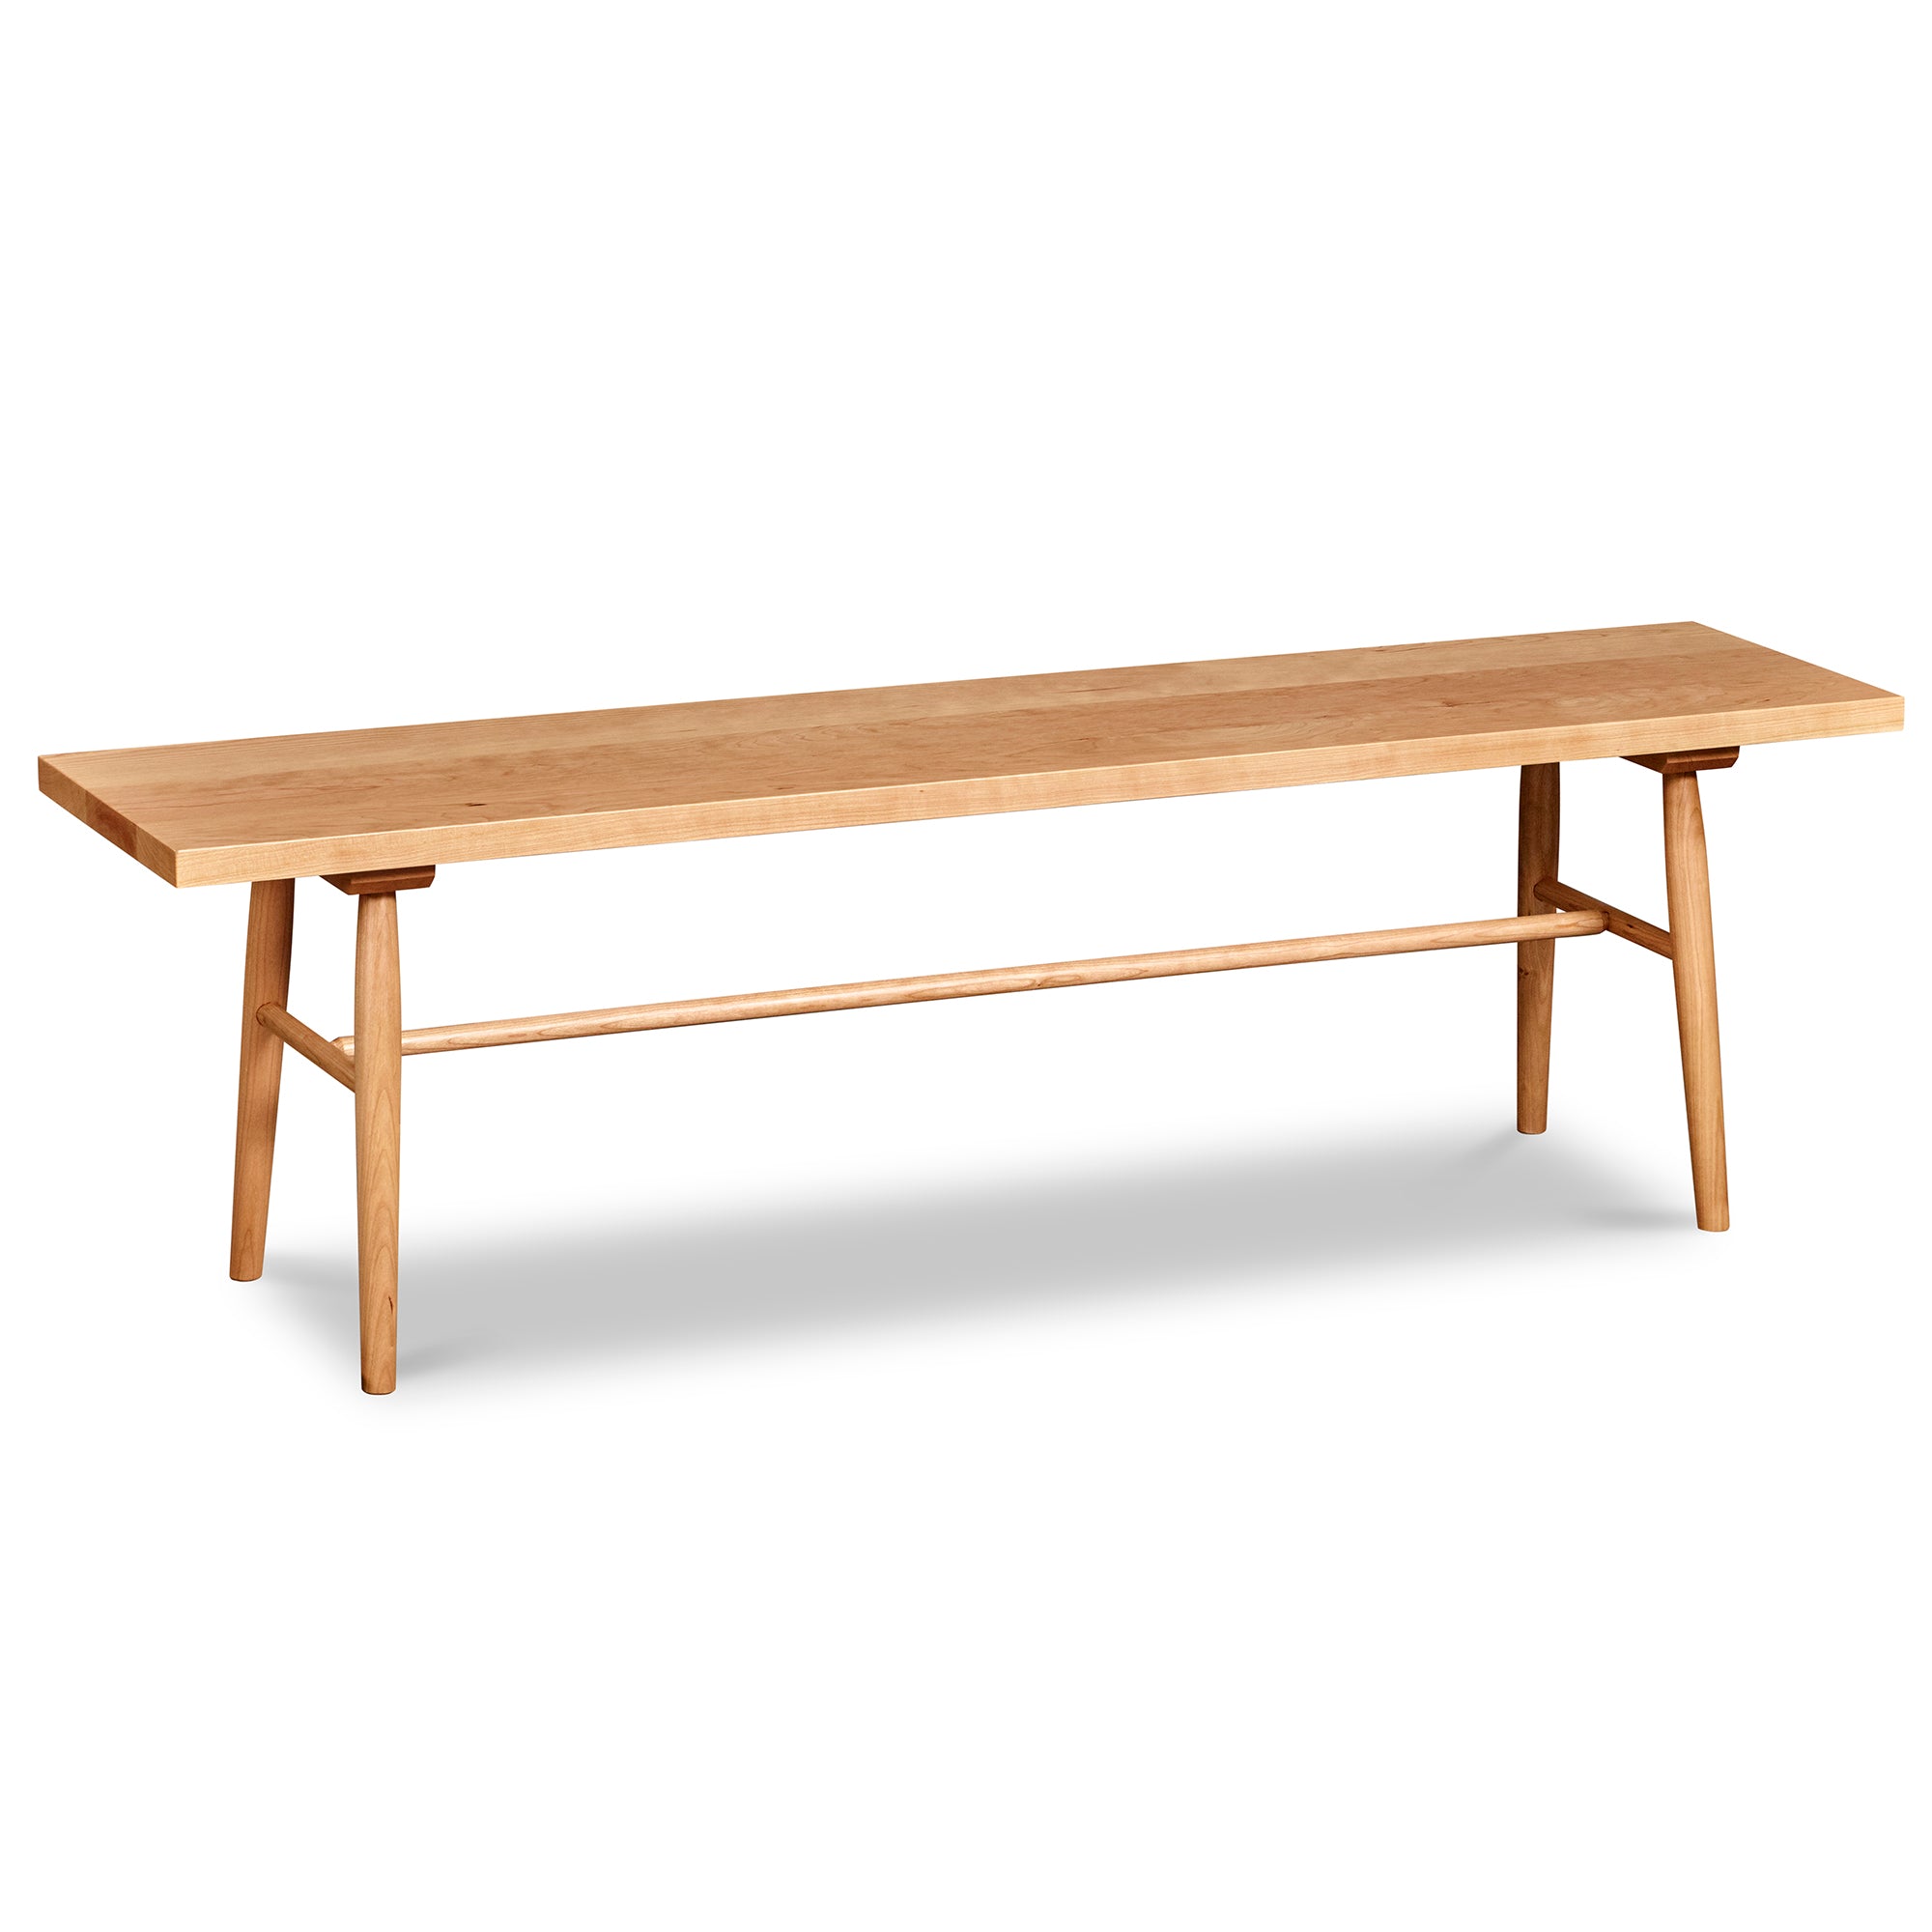 Hudson bench in cherry with turned legs from Maine's Chilton Furniture Co.